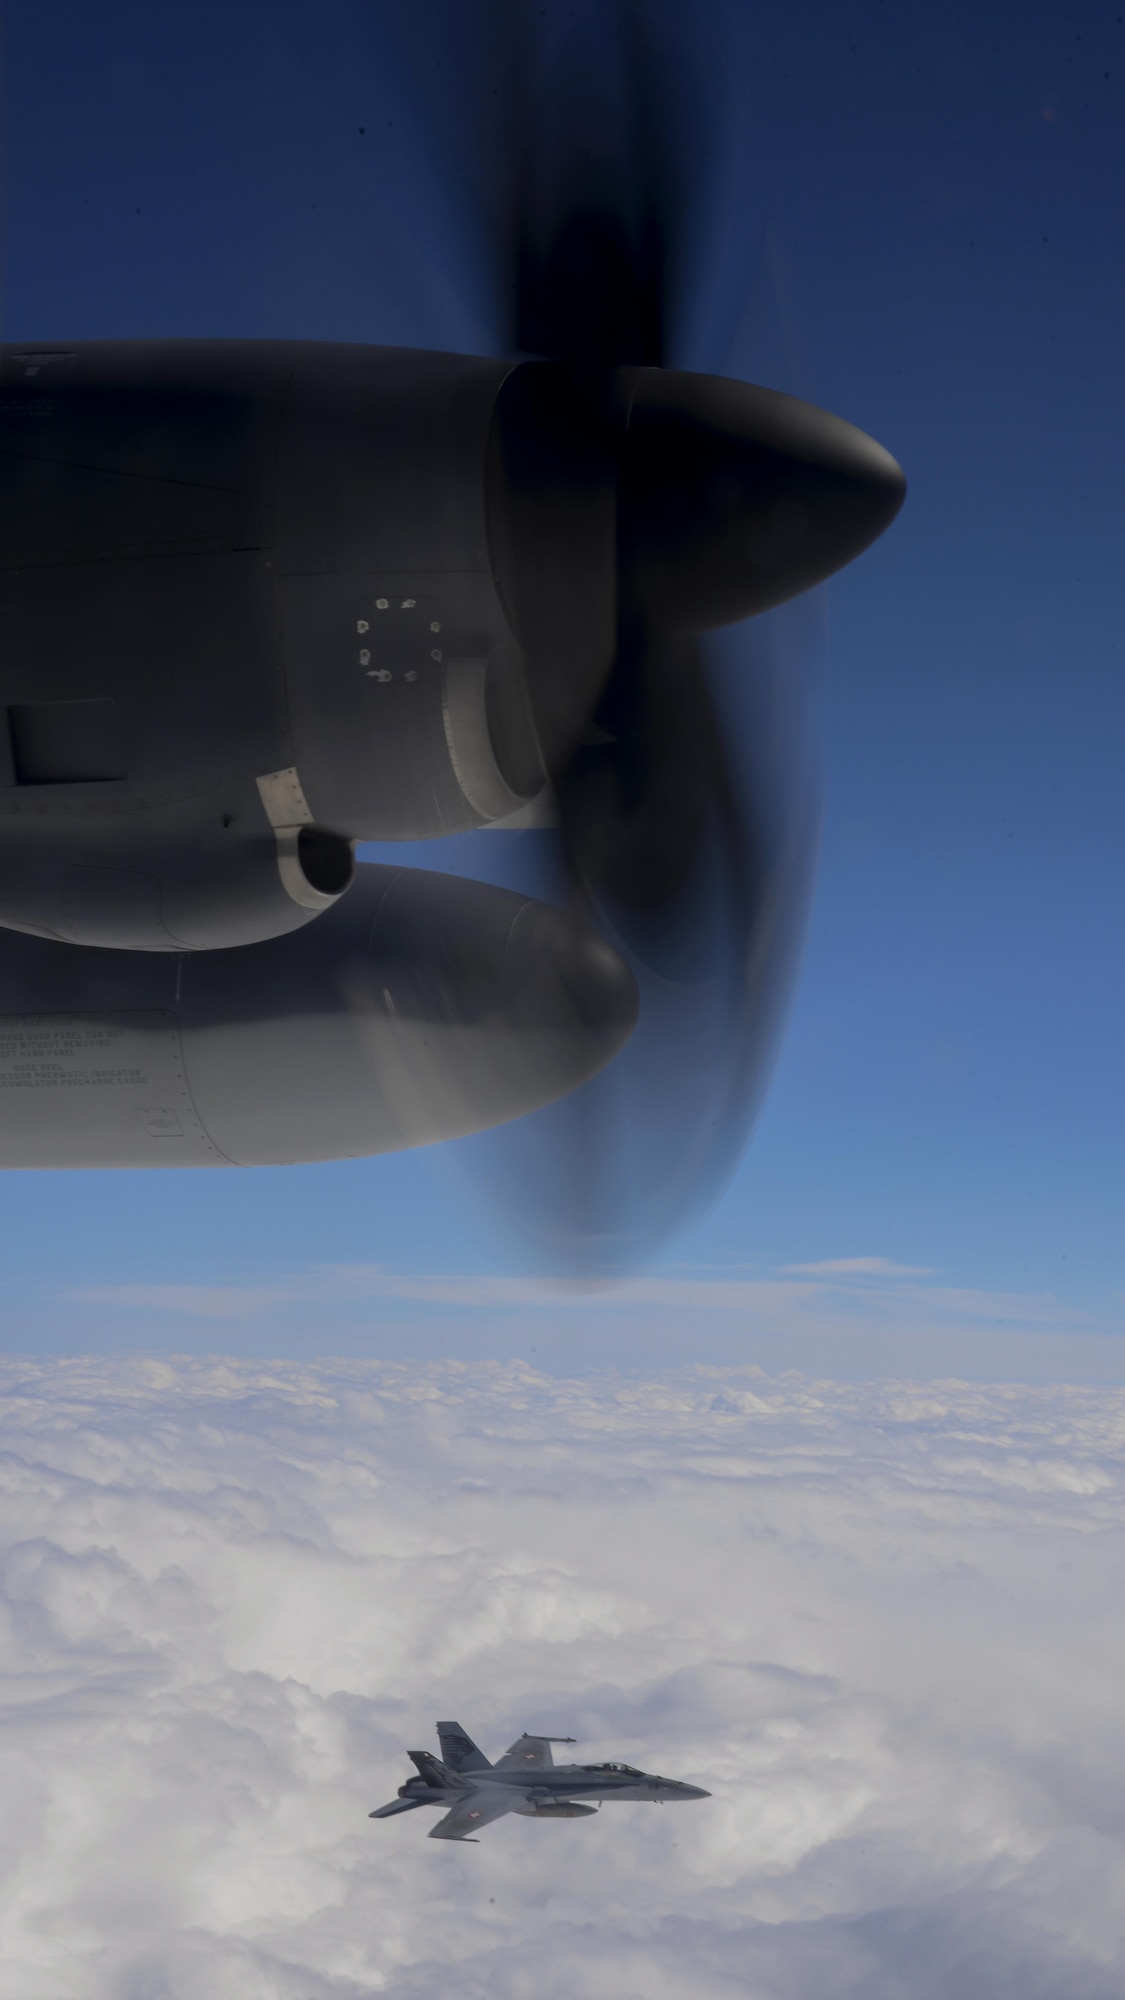 A U.S. Air Force MC-130J Commando II assigned to the 67th Special Operations Squadron participates in aerial intercept training with a Swiss Air Force F-18 Hornet during an exercise April 13, 2016. Performing joint training exercises strengthen ties with allies to ensure mission accomplishment. (U.S. Air Force photo by Senior Airman Victoria H. Taylor/Released)